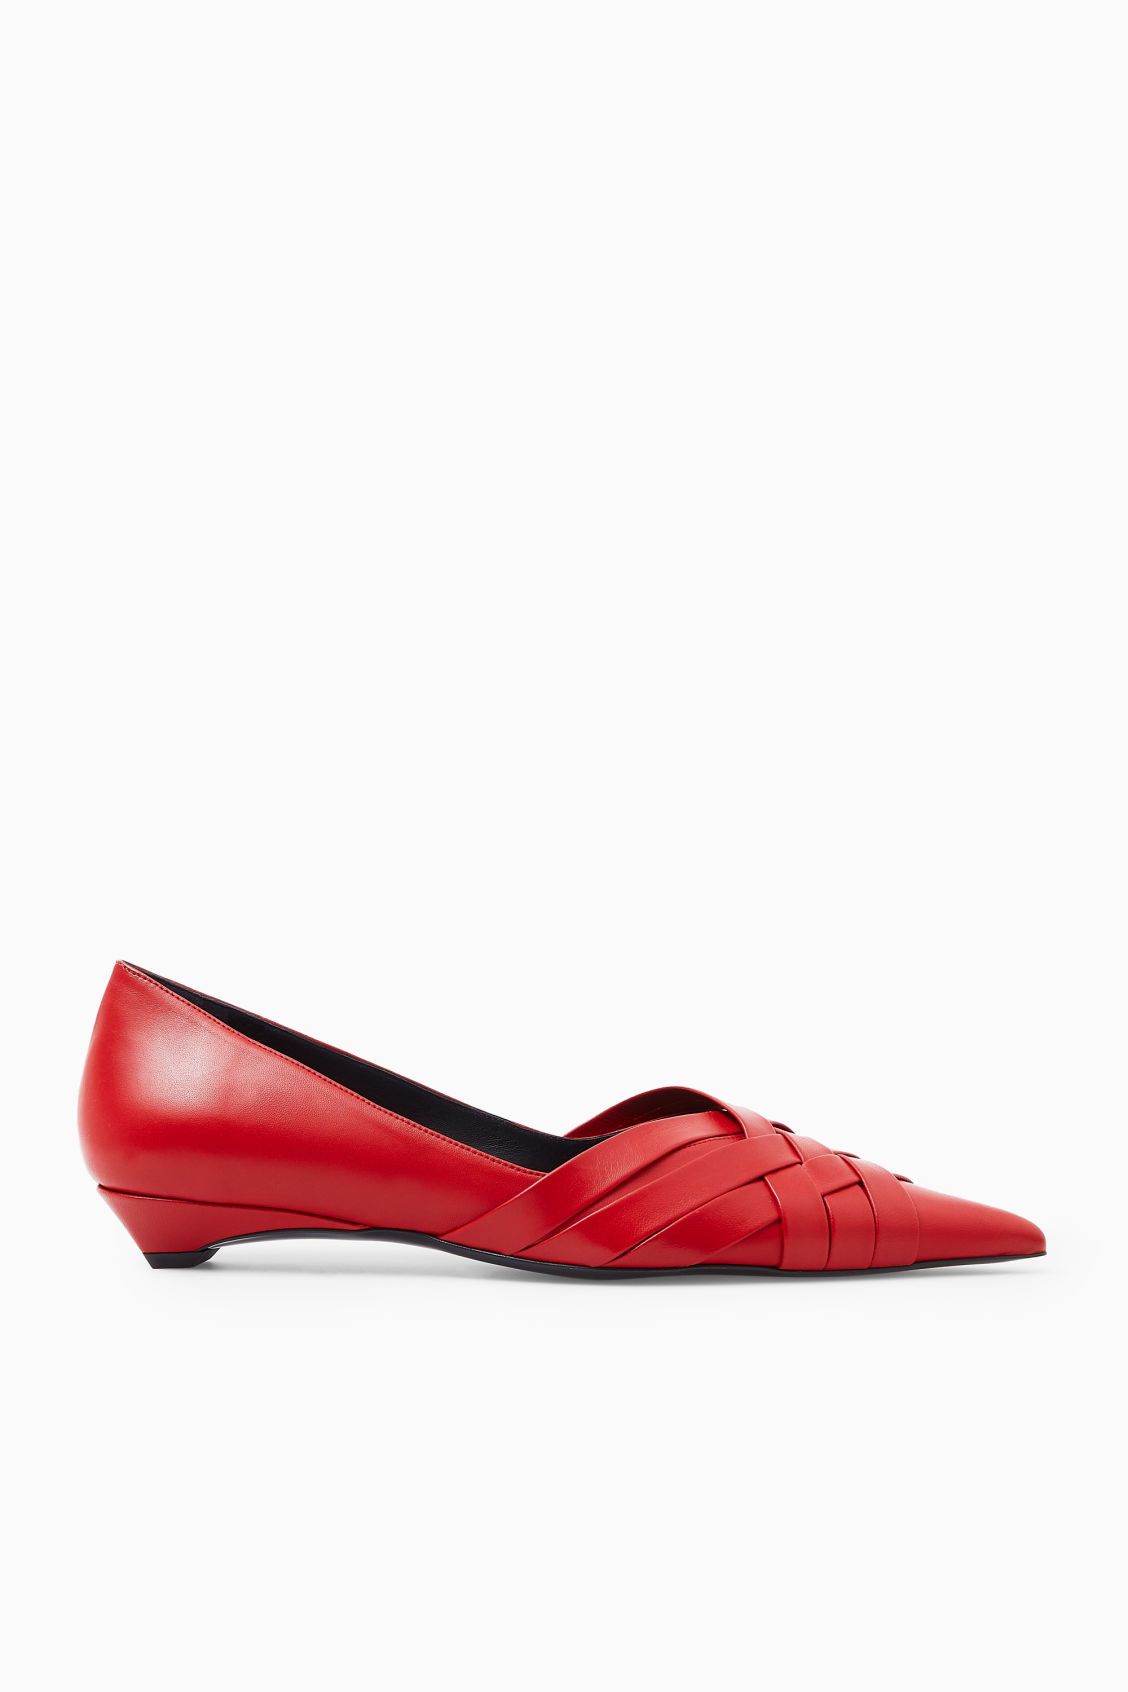 CROSSOVER BALLET FLATS - RED - Shoes - COS | COS (US)